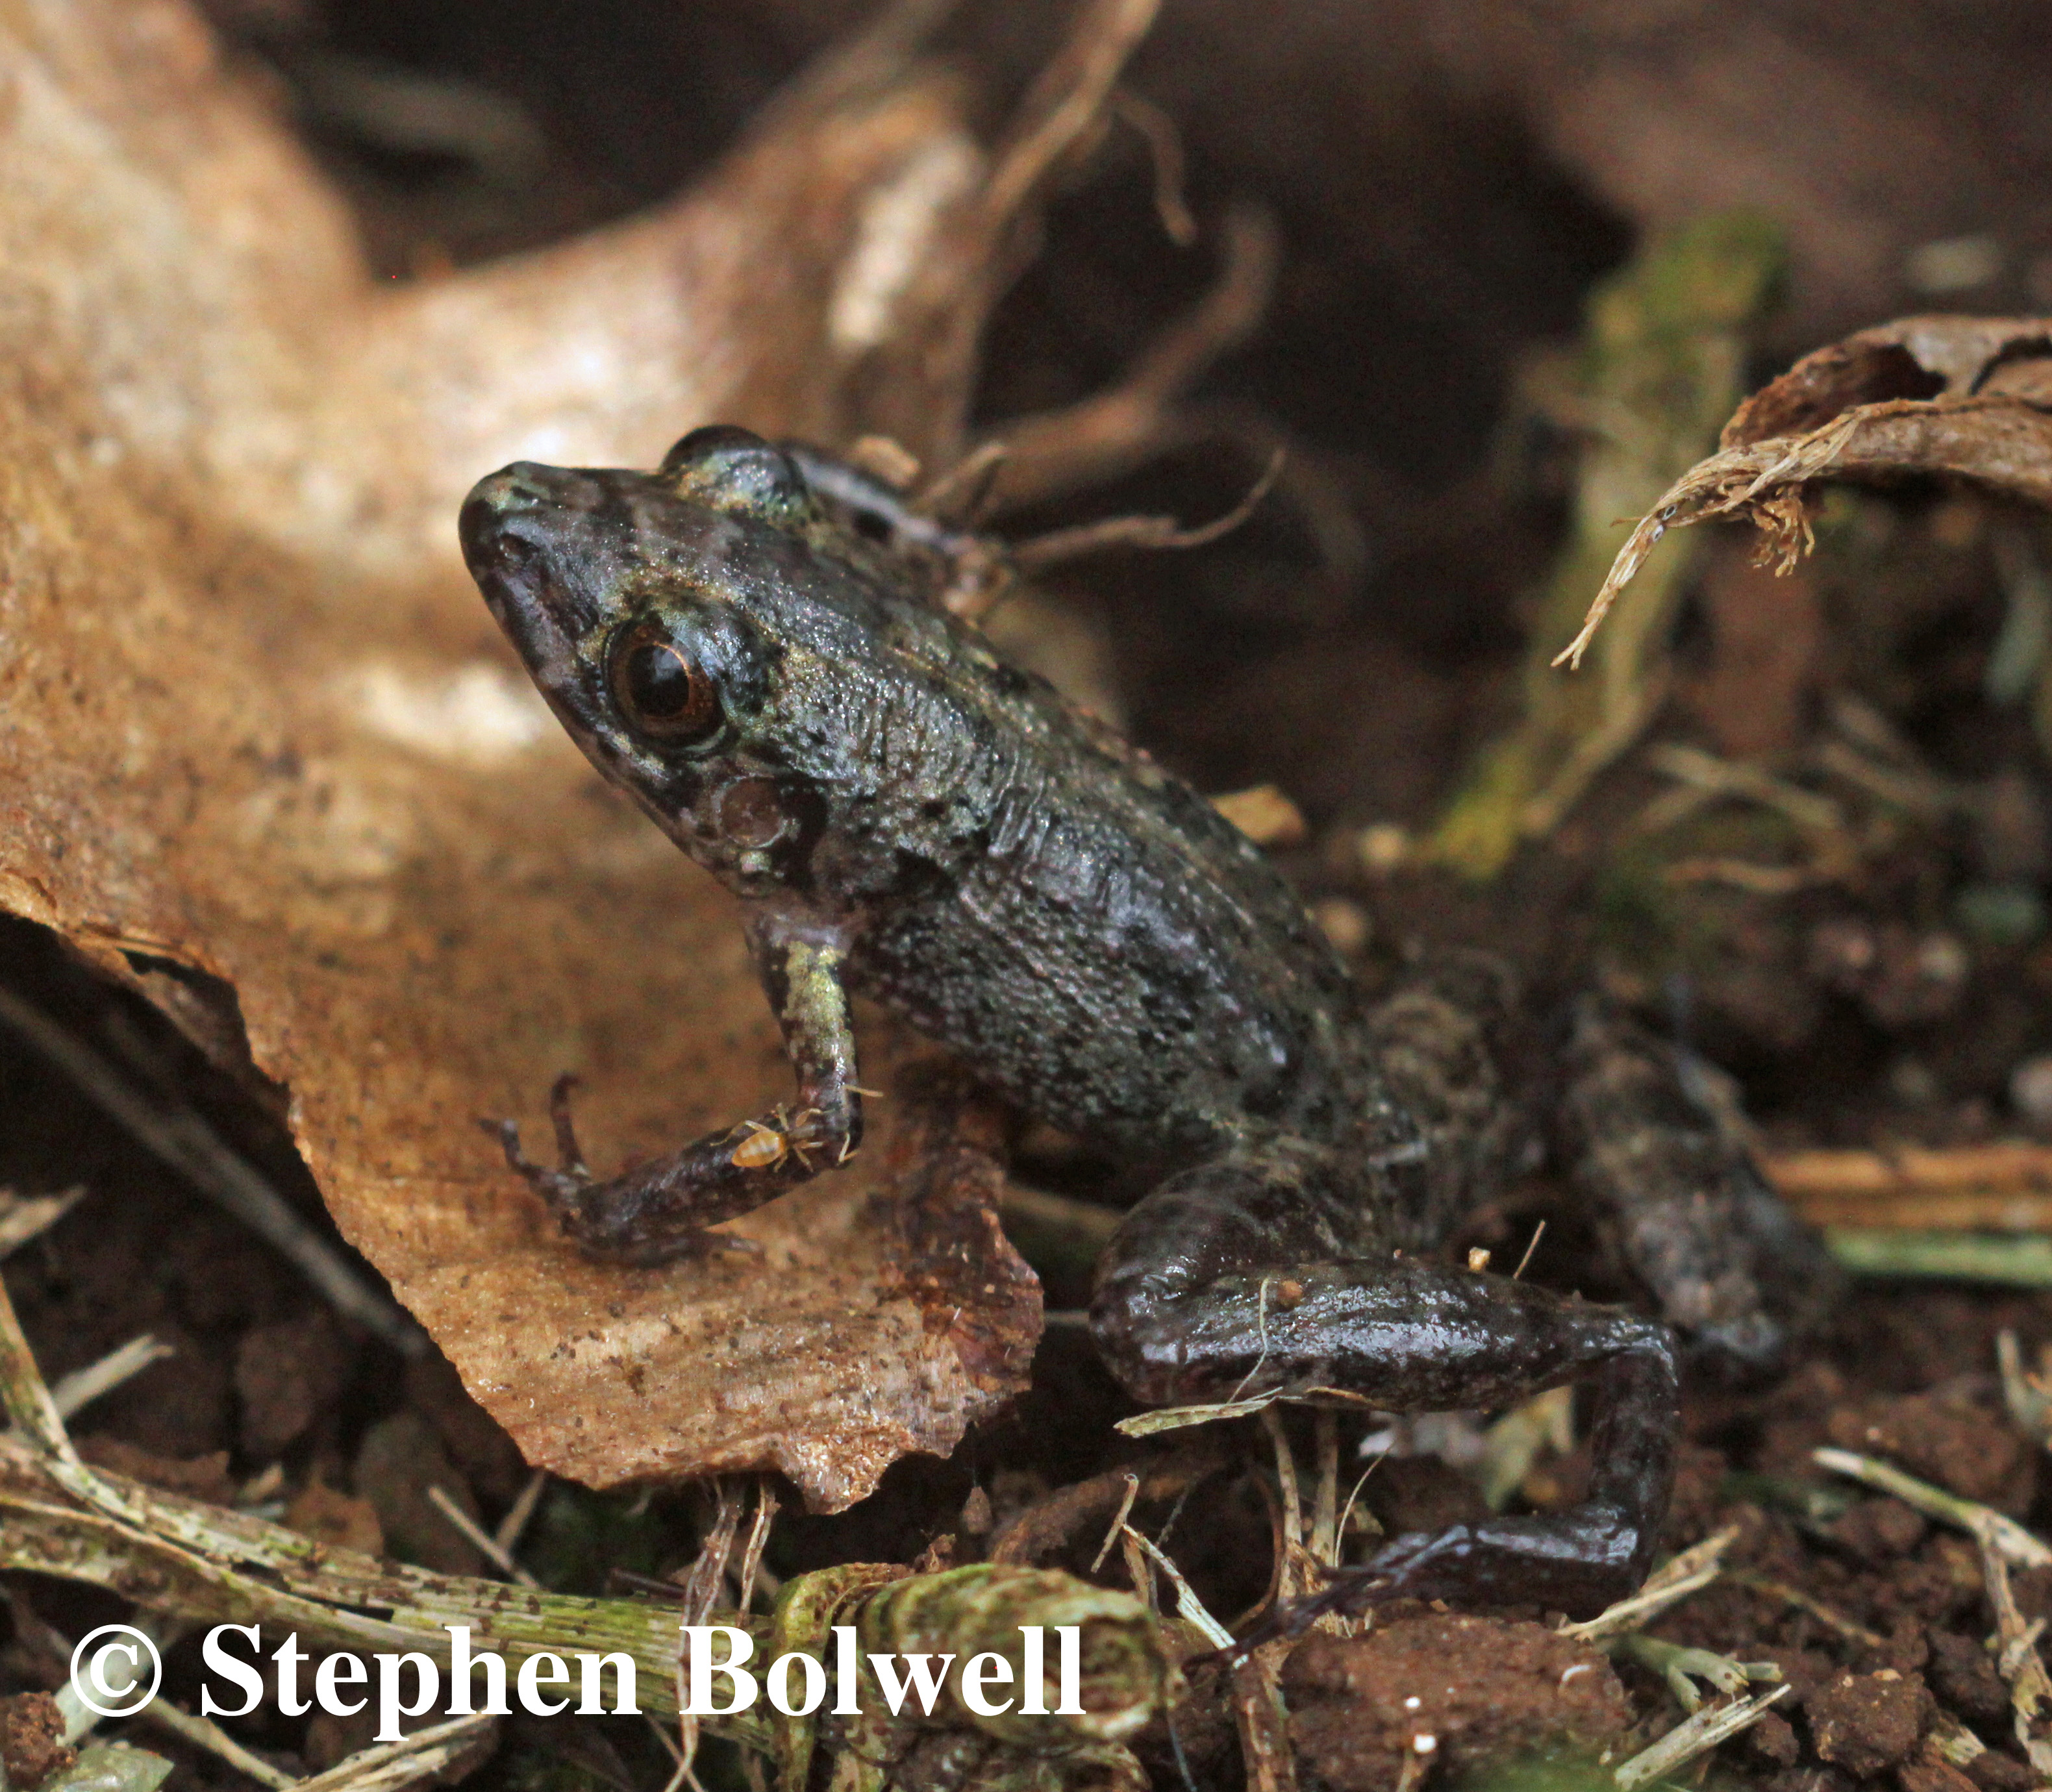 The greenhouse frog Eleutherodactylus planirostris is one of many introduced frogs eating their way through Hawaii's native invertebrate species.